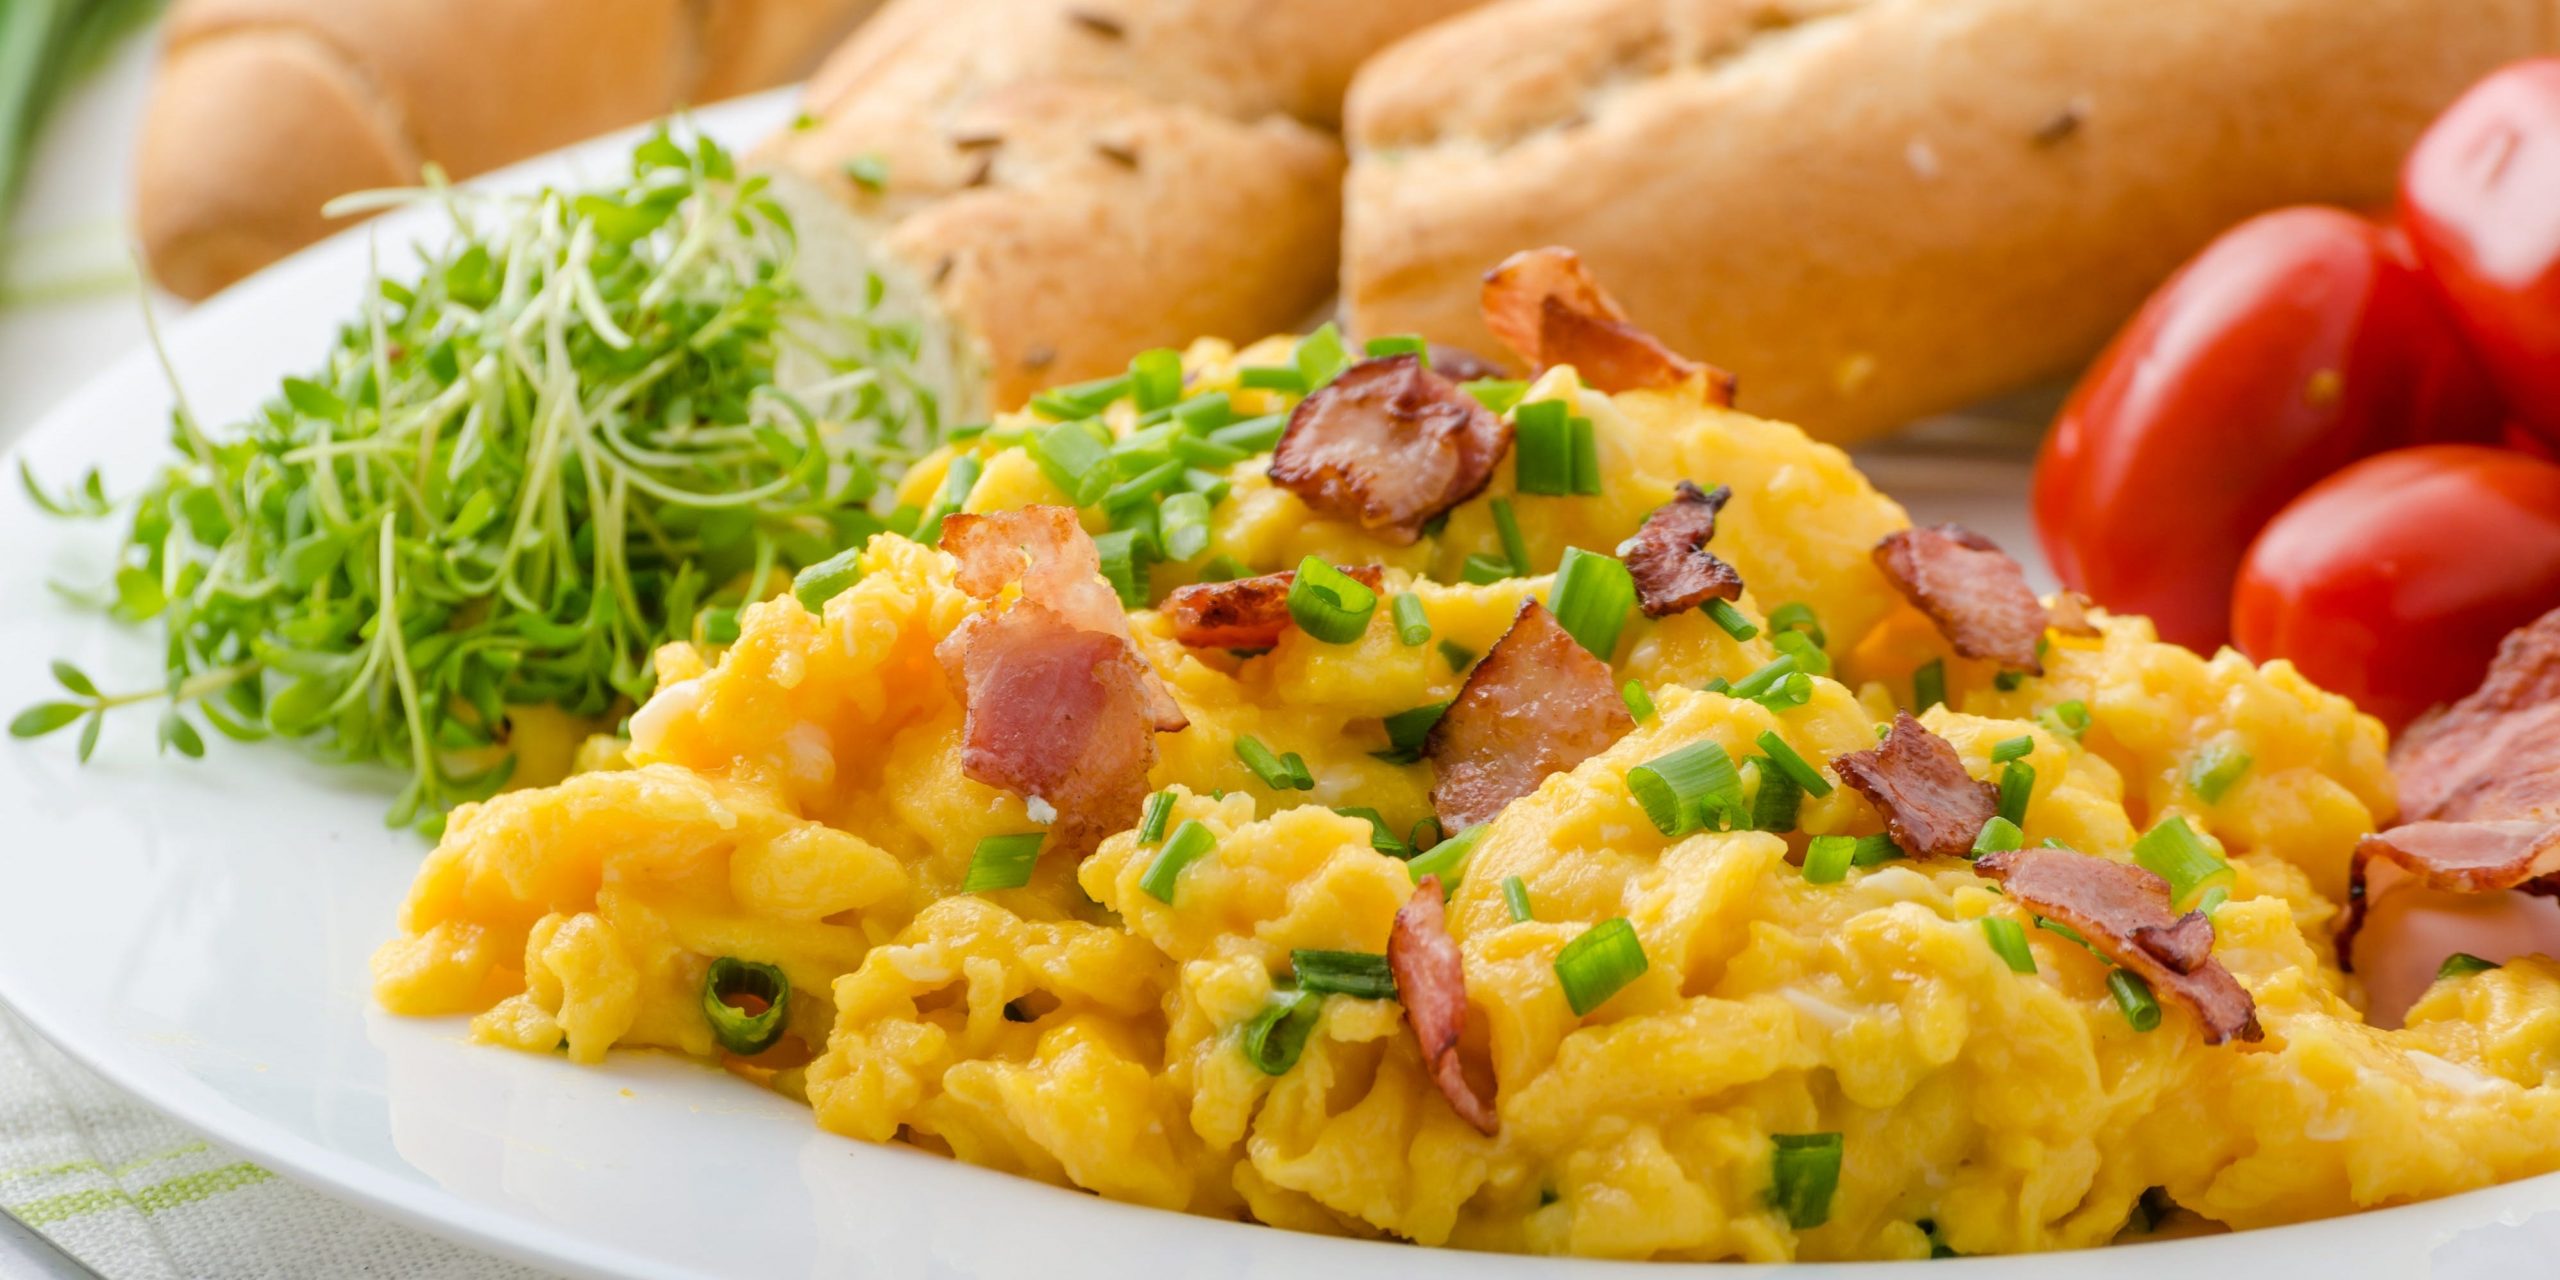 Scrambled eggs with bacon, chive and tomatoes, fresh juice and greens.